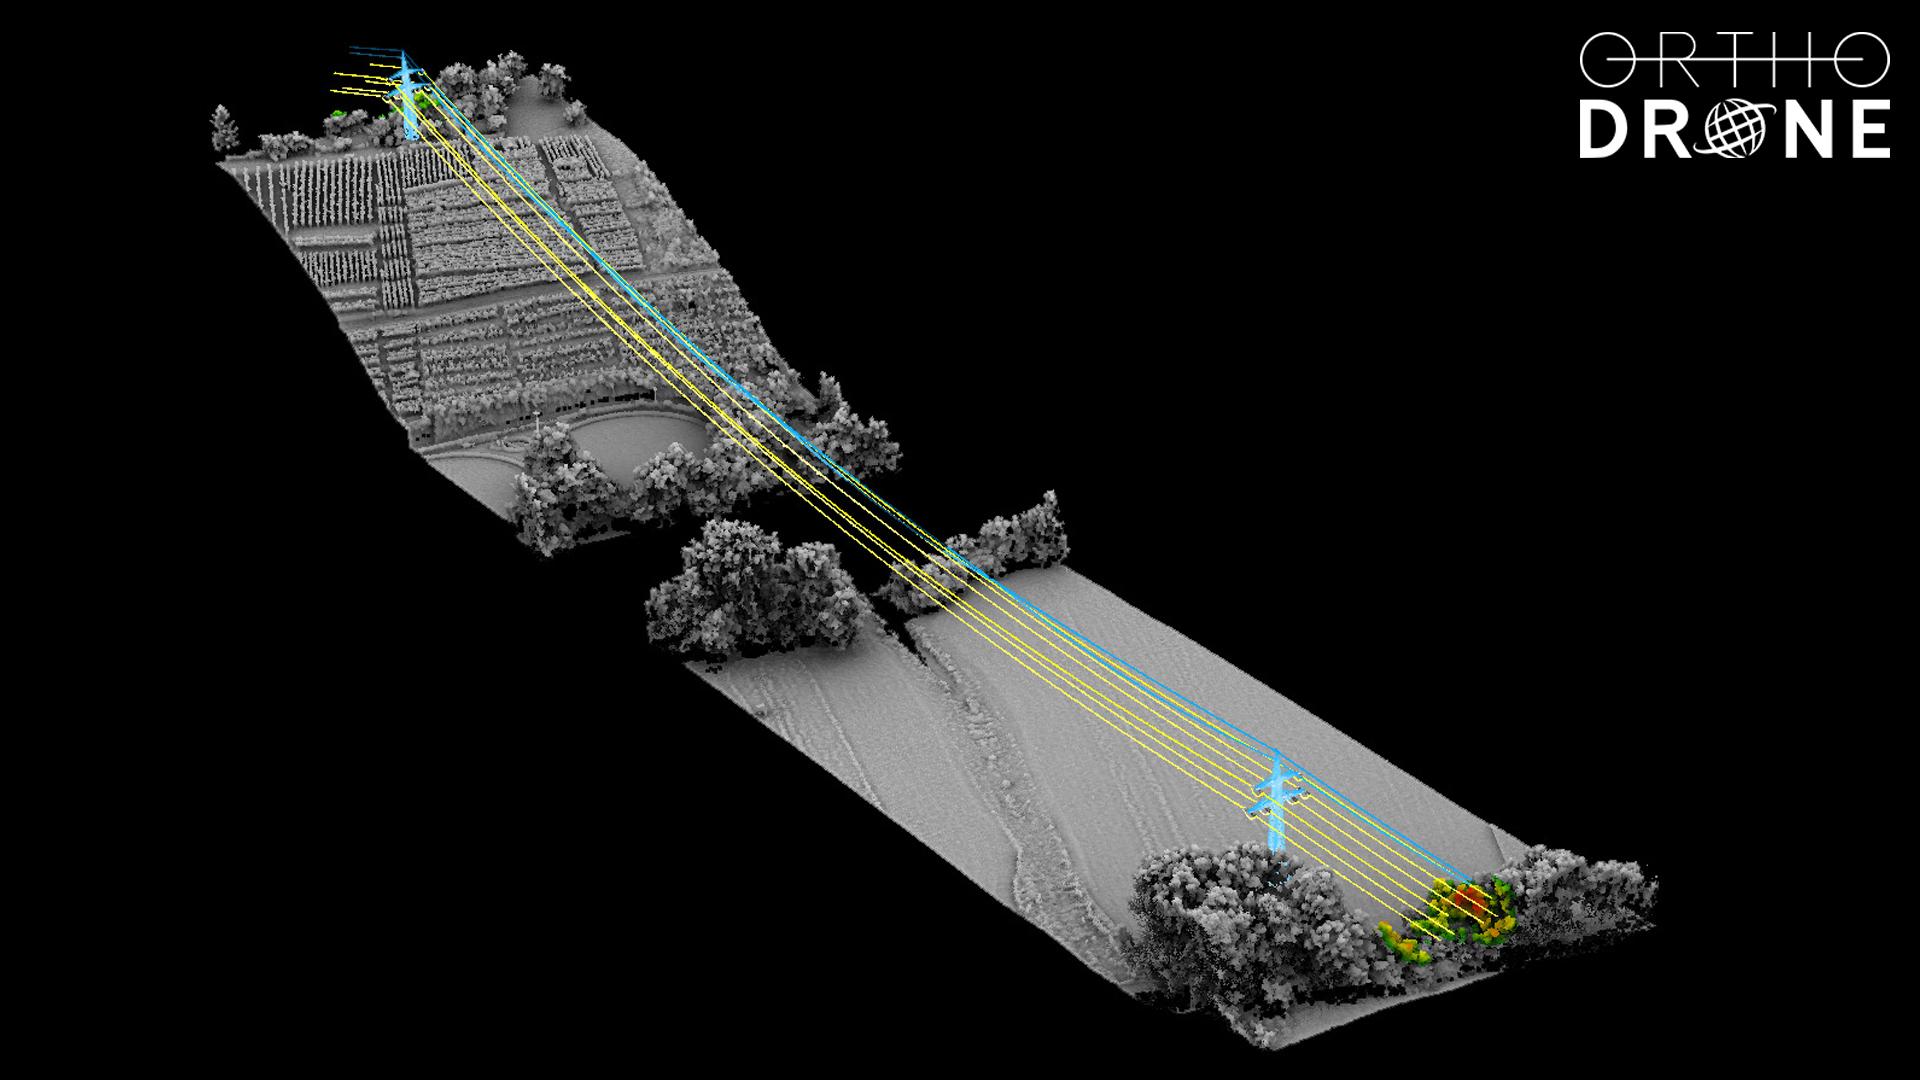 Orthodrone ULS point cloud of uncrewed lidar powerline survey over river, clearly visible powerlines and vegetation analysis